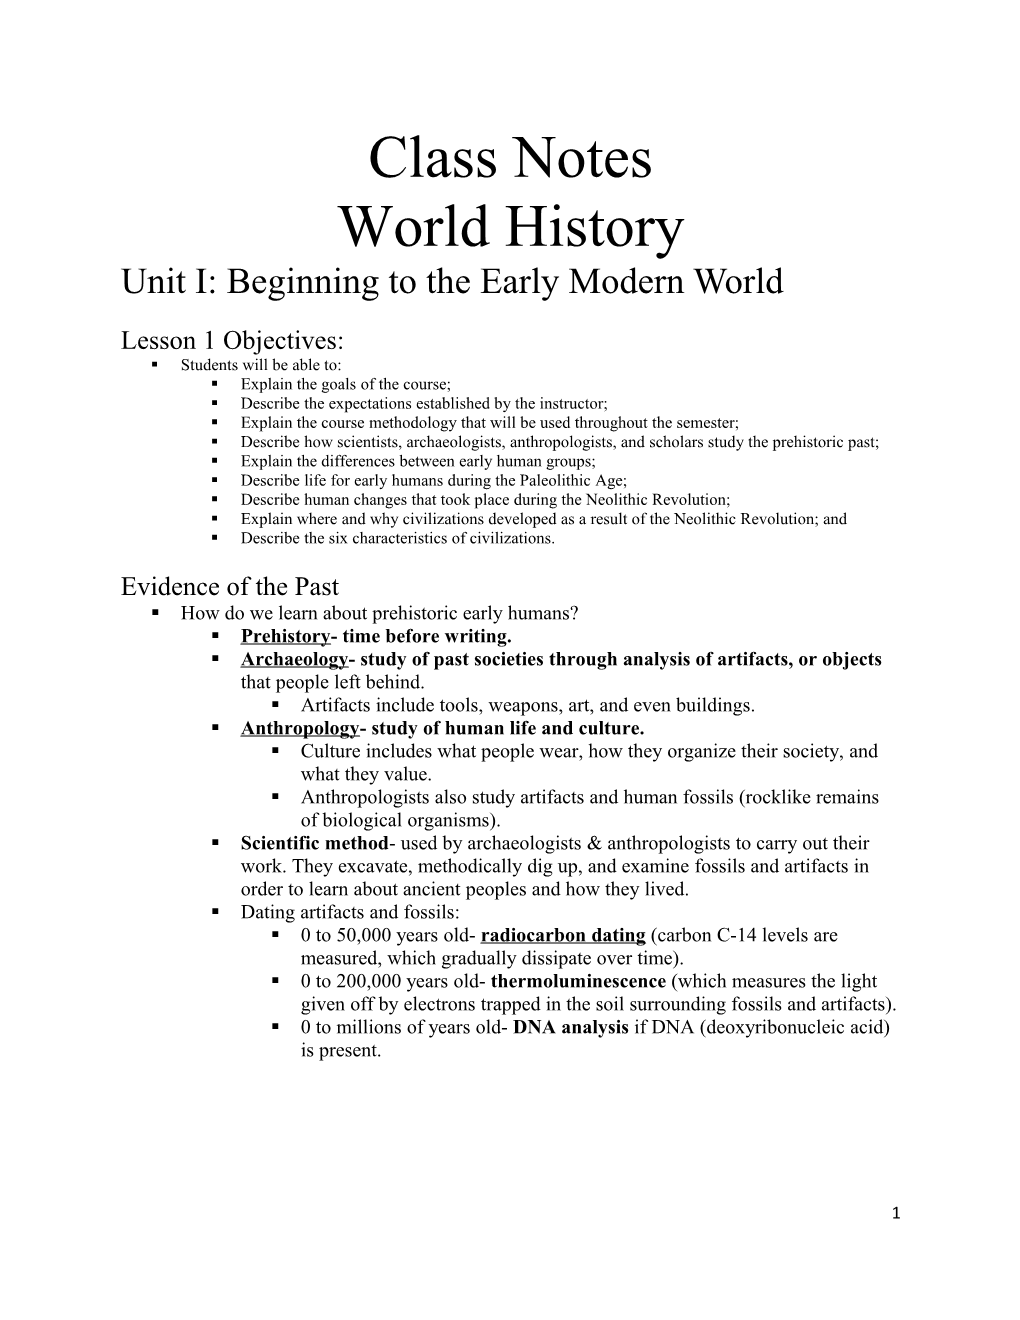 Unit I: Beginning to the Early Modern World